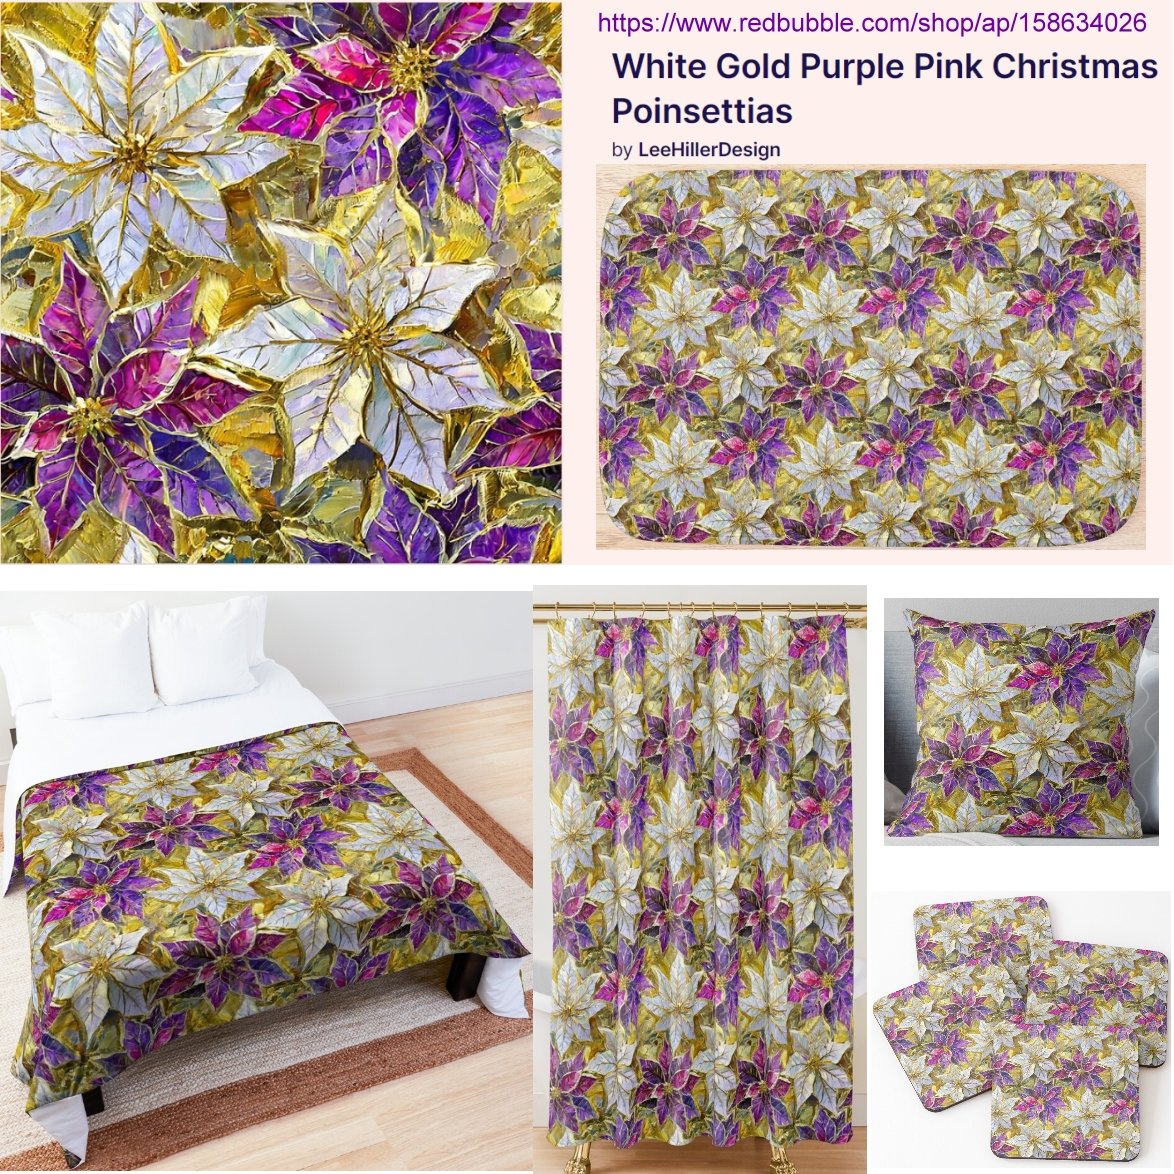 🌟🎄🎁🎄🎁🎄🌟  
White Gold Purple Pink Christmas Poinsettias #redbubbleshop
redbubble.com/shop/ap/158634…

 #Christmas #poinsettias #art digital designs #gifts #giftideas #coasters #pillows #homedecoration #homedecor #blankets #duvetcovers #showercutains and more. #redbubble